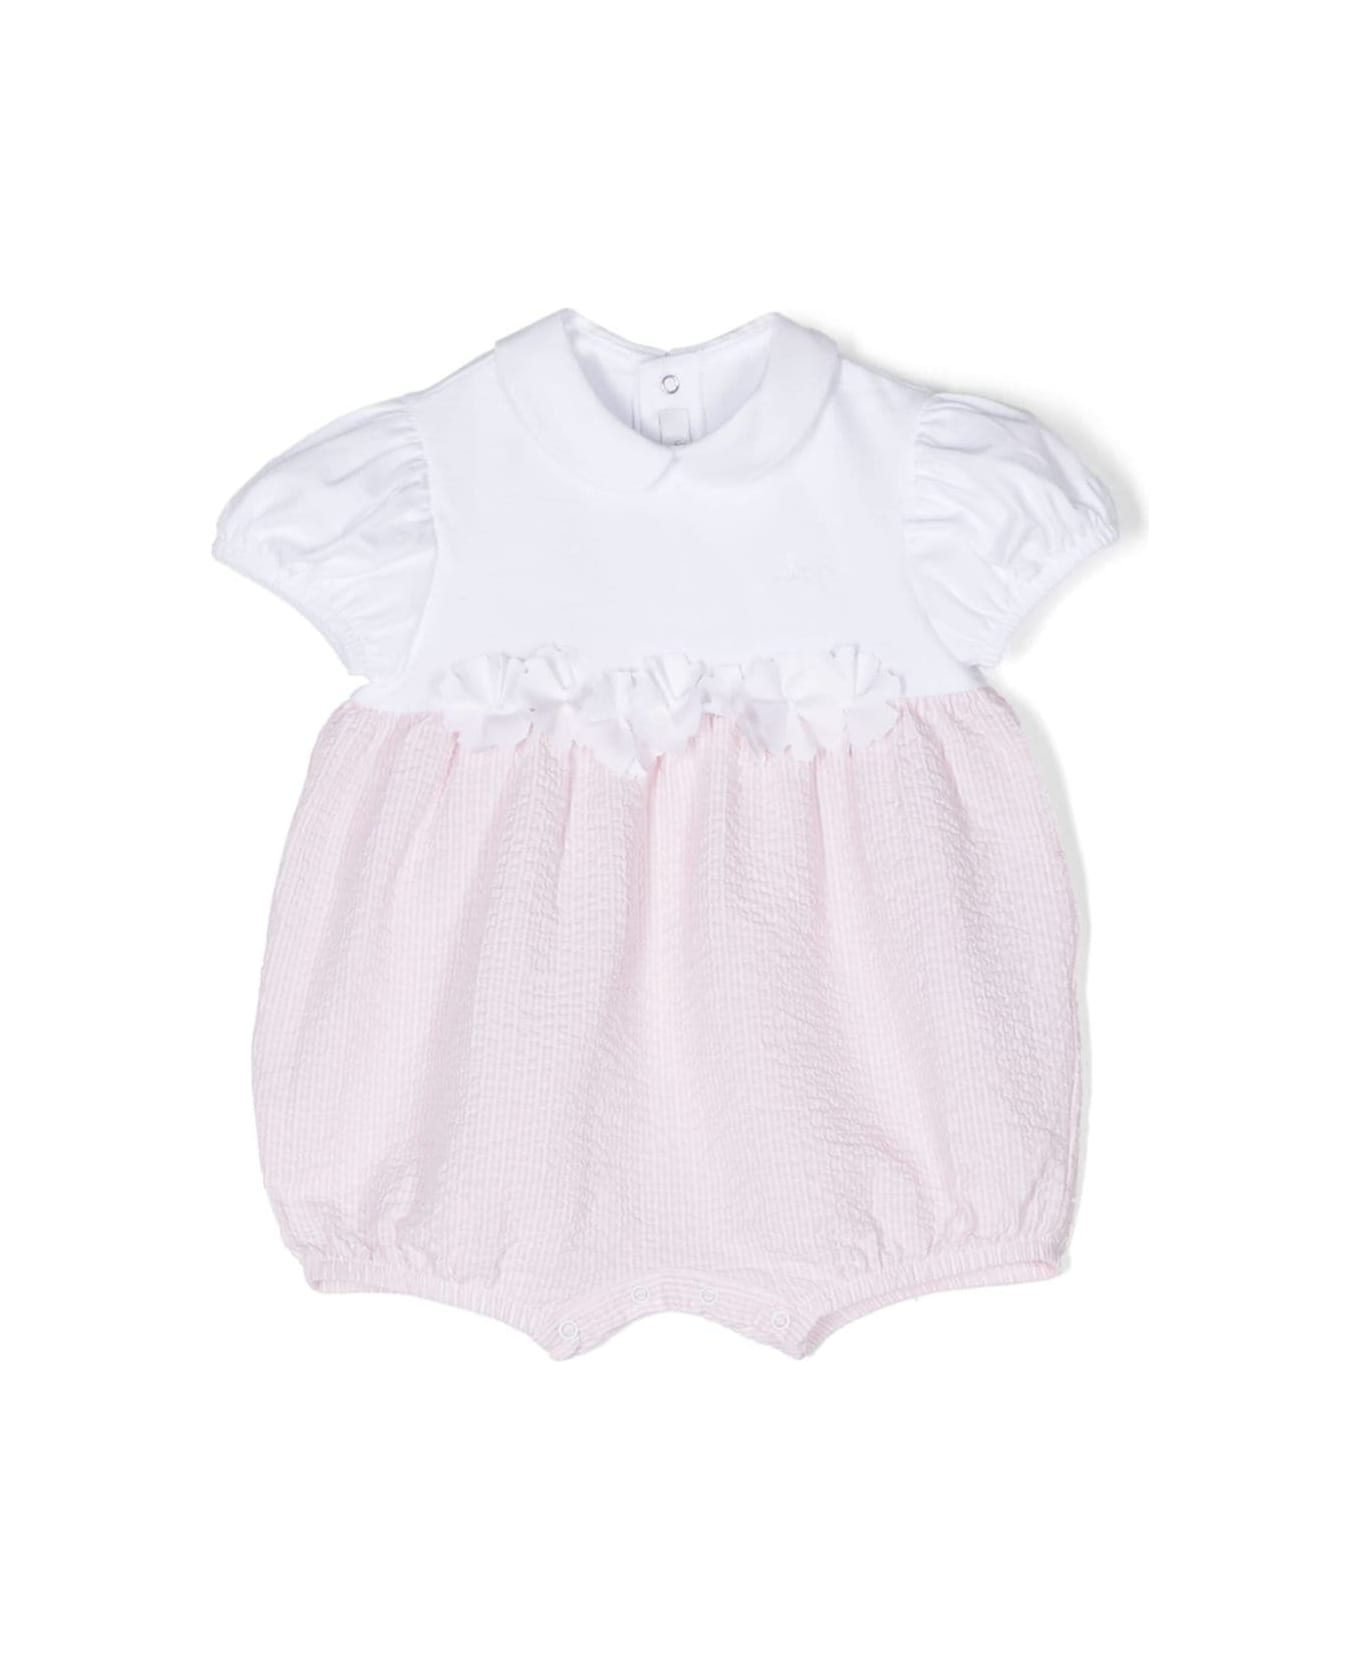 Il Gufo Pink And White Bimateric Short Playsuit With Appliqué Flowers - Pink ボディスーツ＆セットアップ